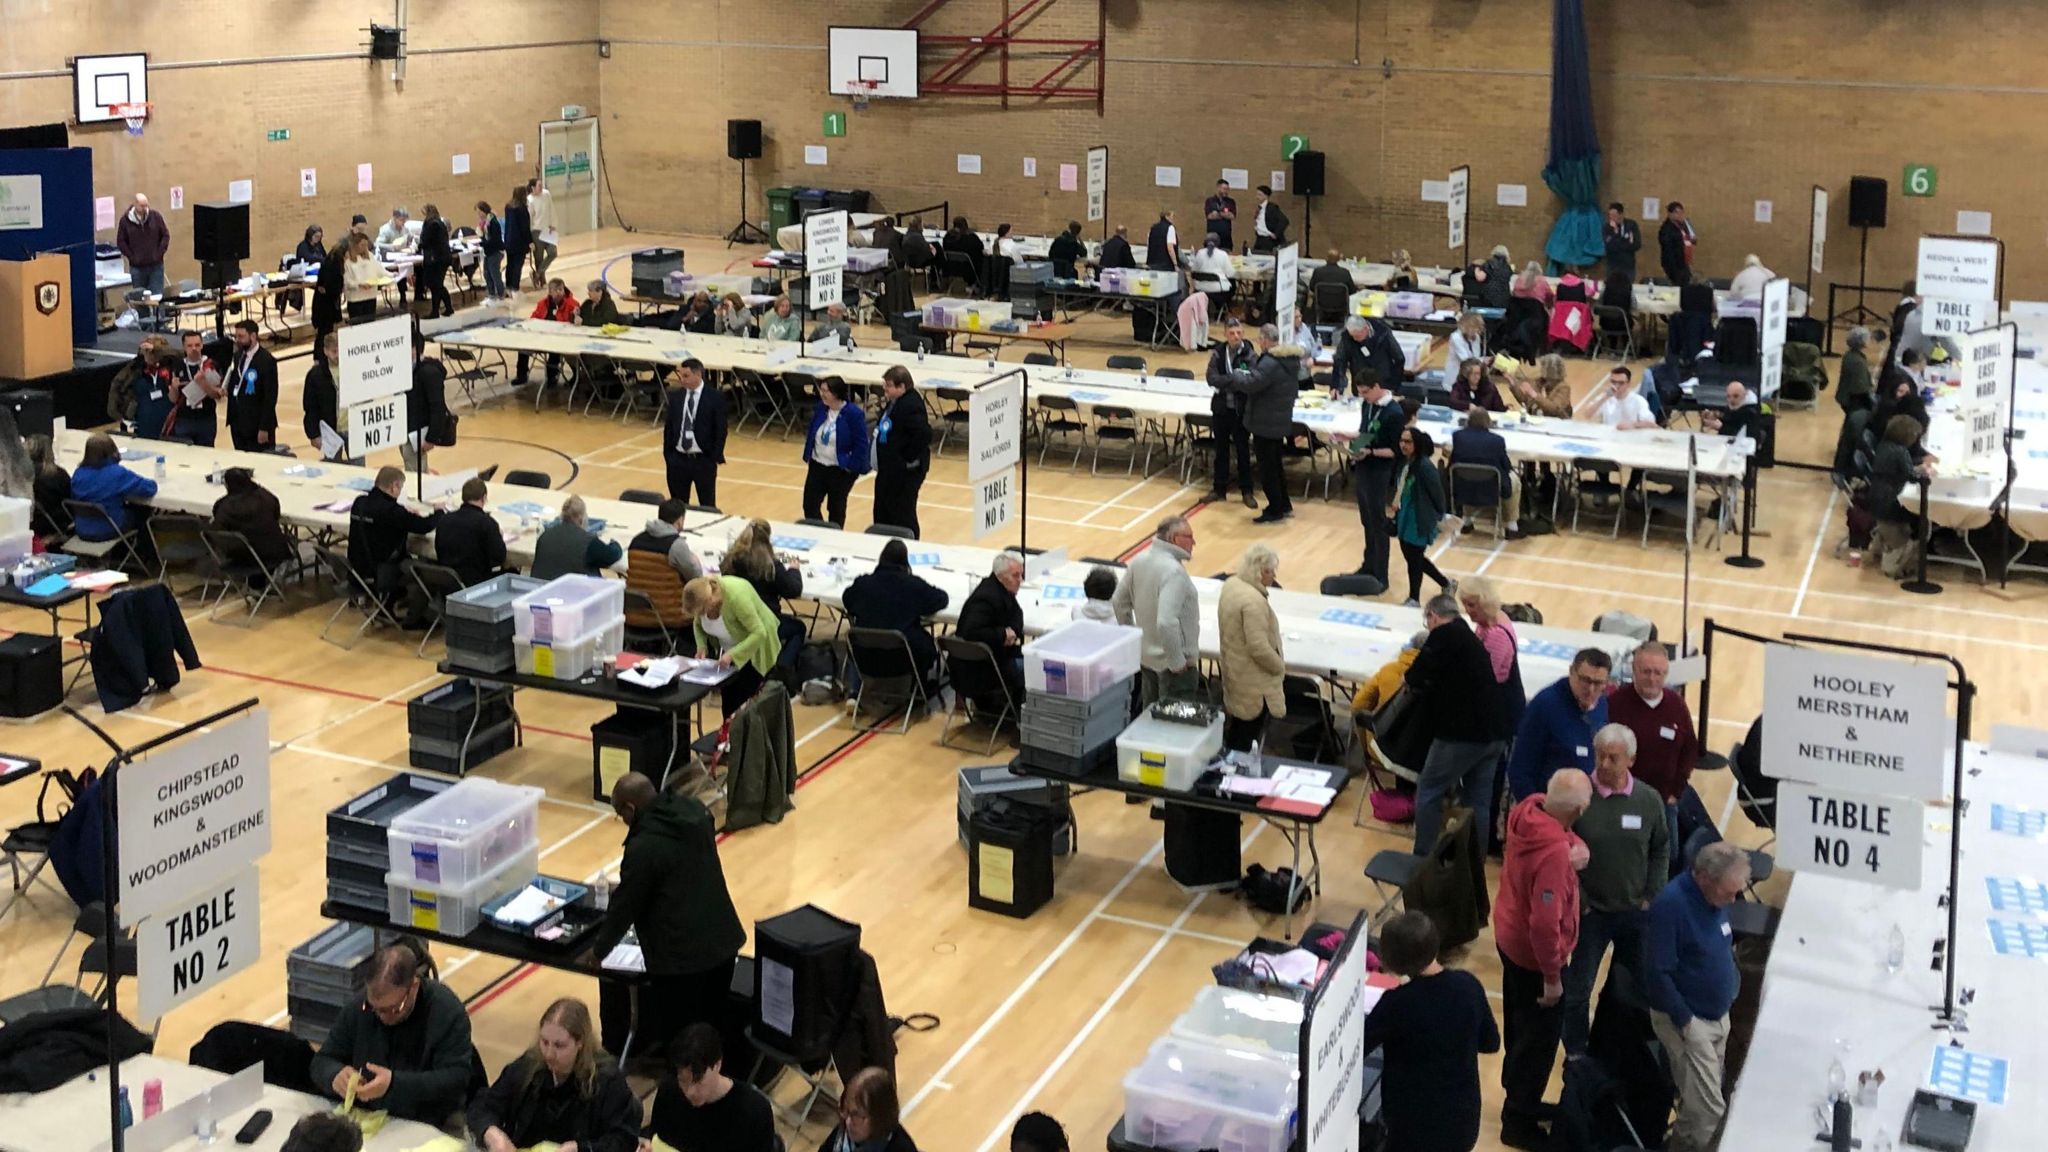 The counting hall at a leisure centre in Redhill